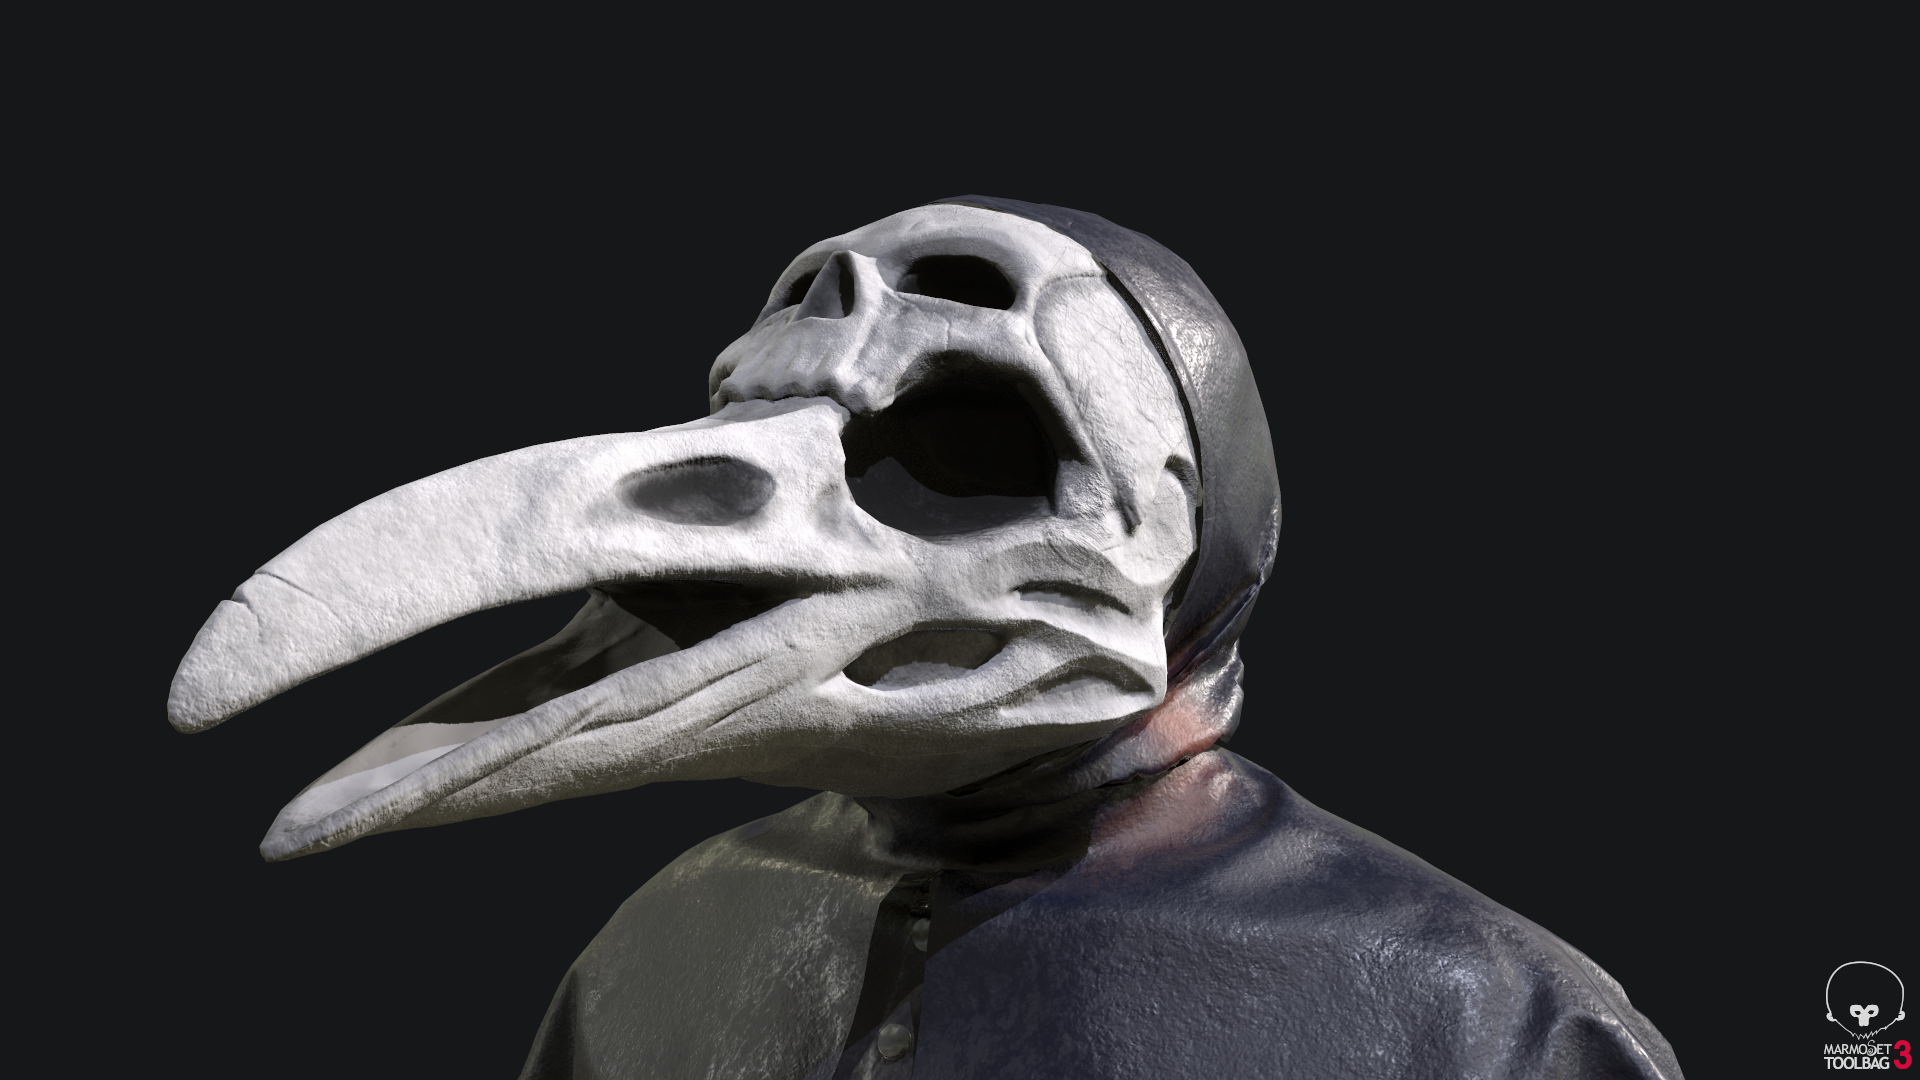 Michael Langran - Final project of year 3 showing a plague doctor with a more terrifying twist